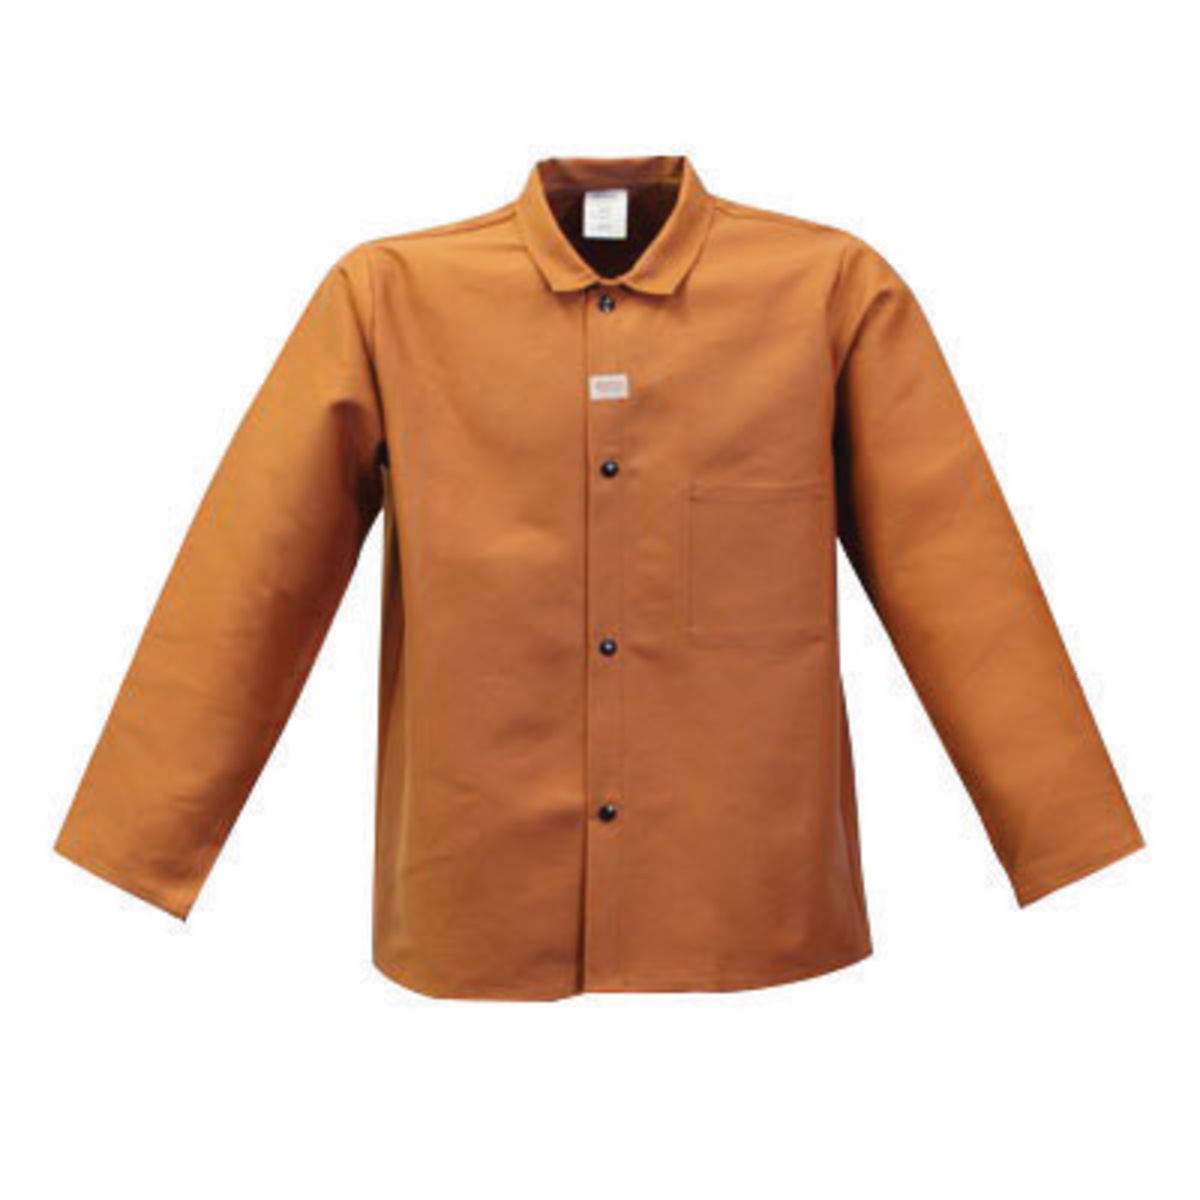 Stanco Safety Products™ Size 3X Rust Brown Cotton Flame Resistant Welding Jacket With Snap Closure